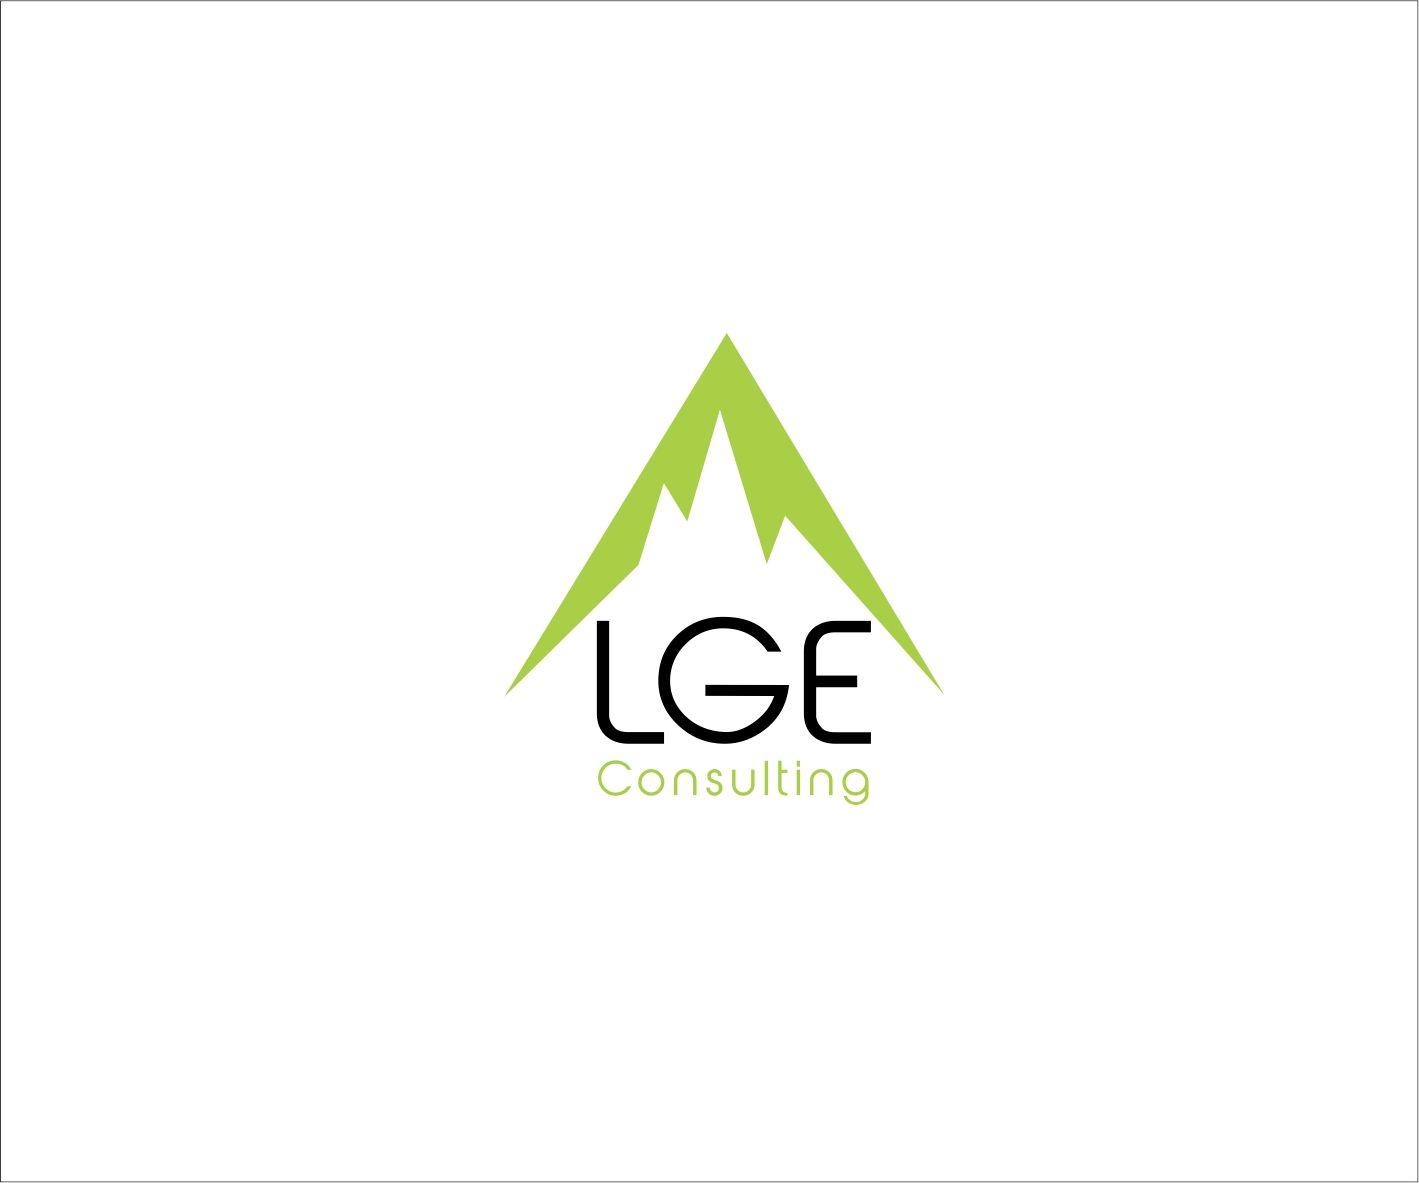 LGE Logo - Serious, Professional, Business Logo Design for LGE Consulting by ...